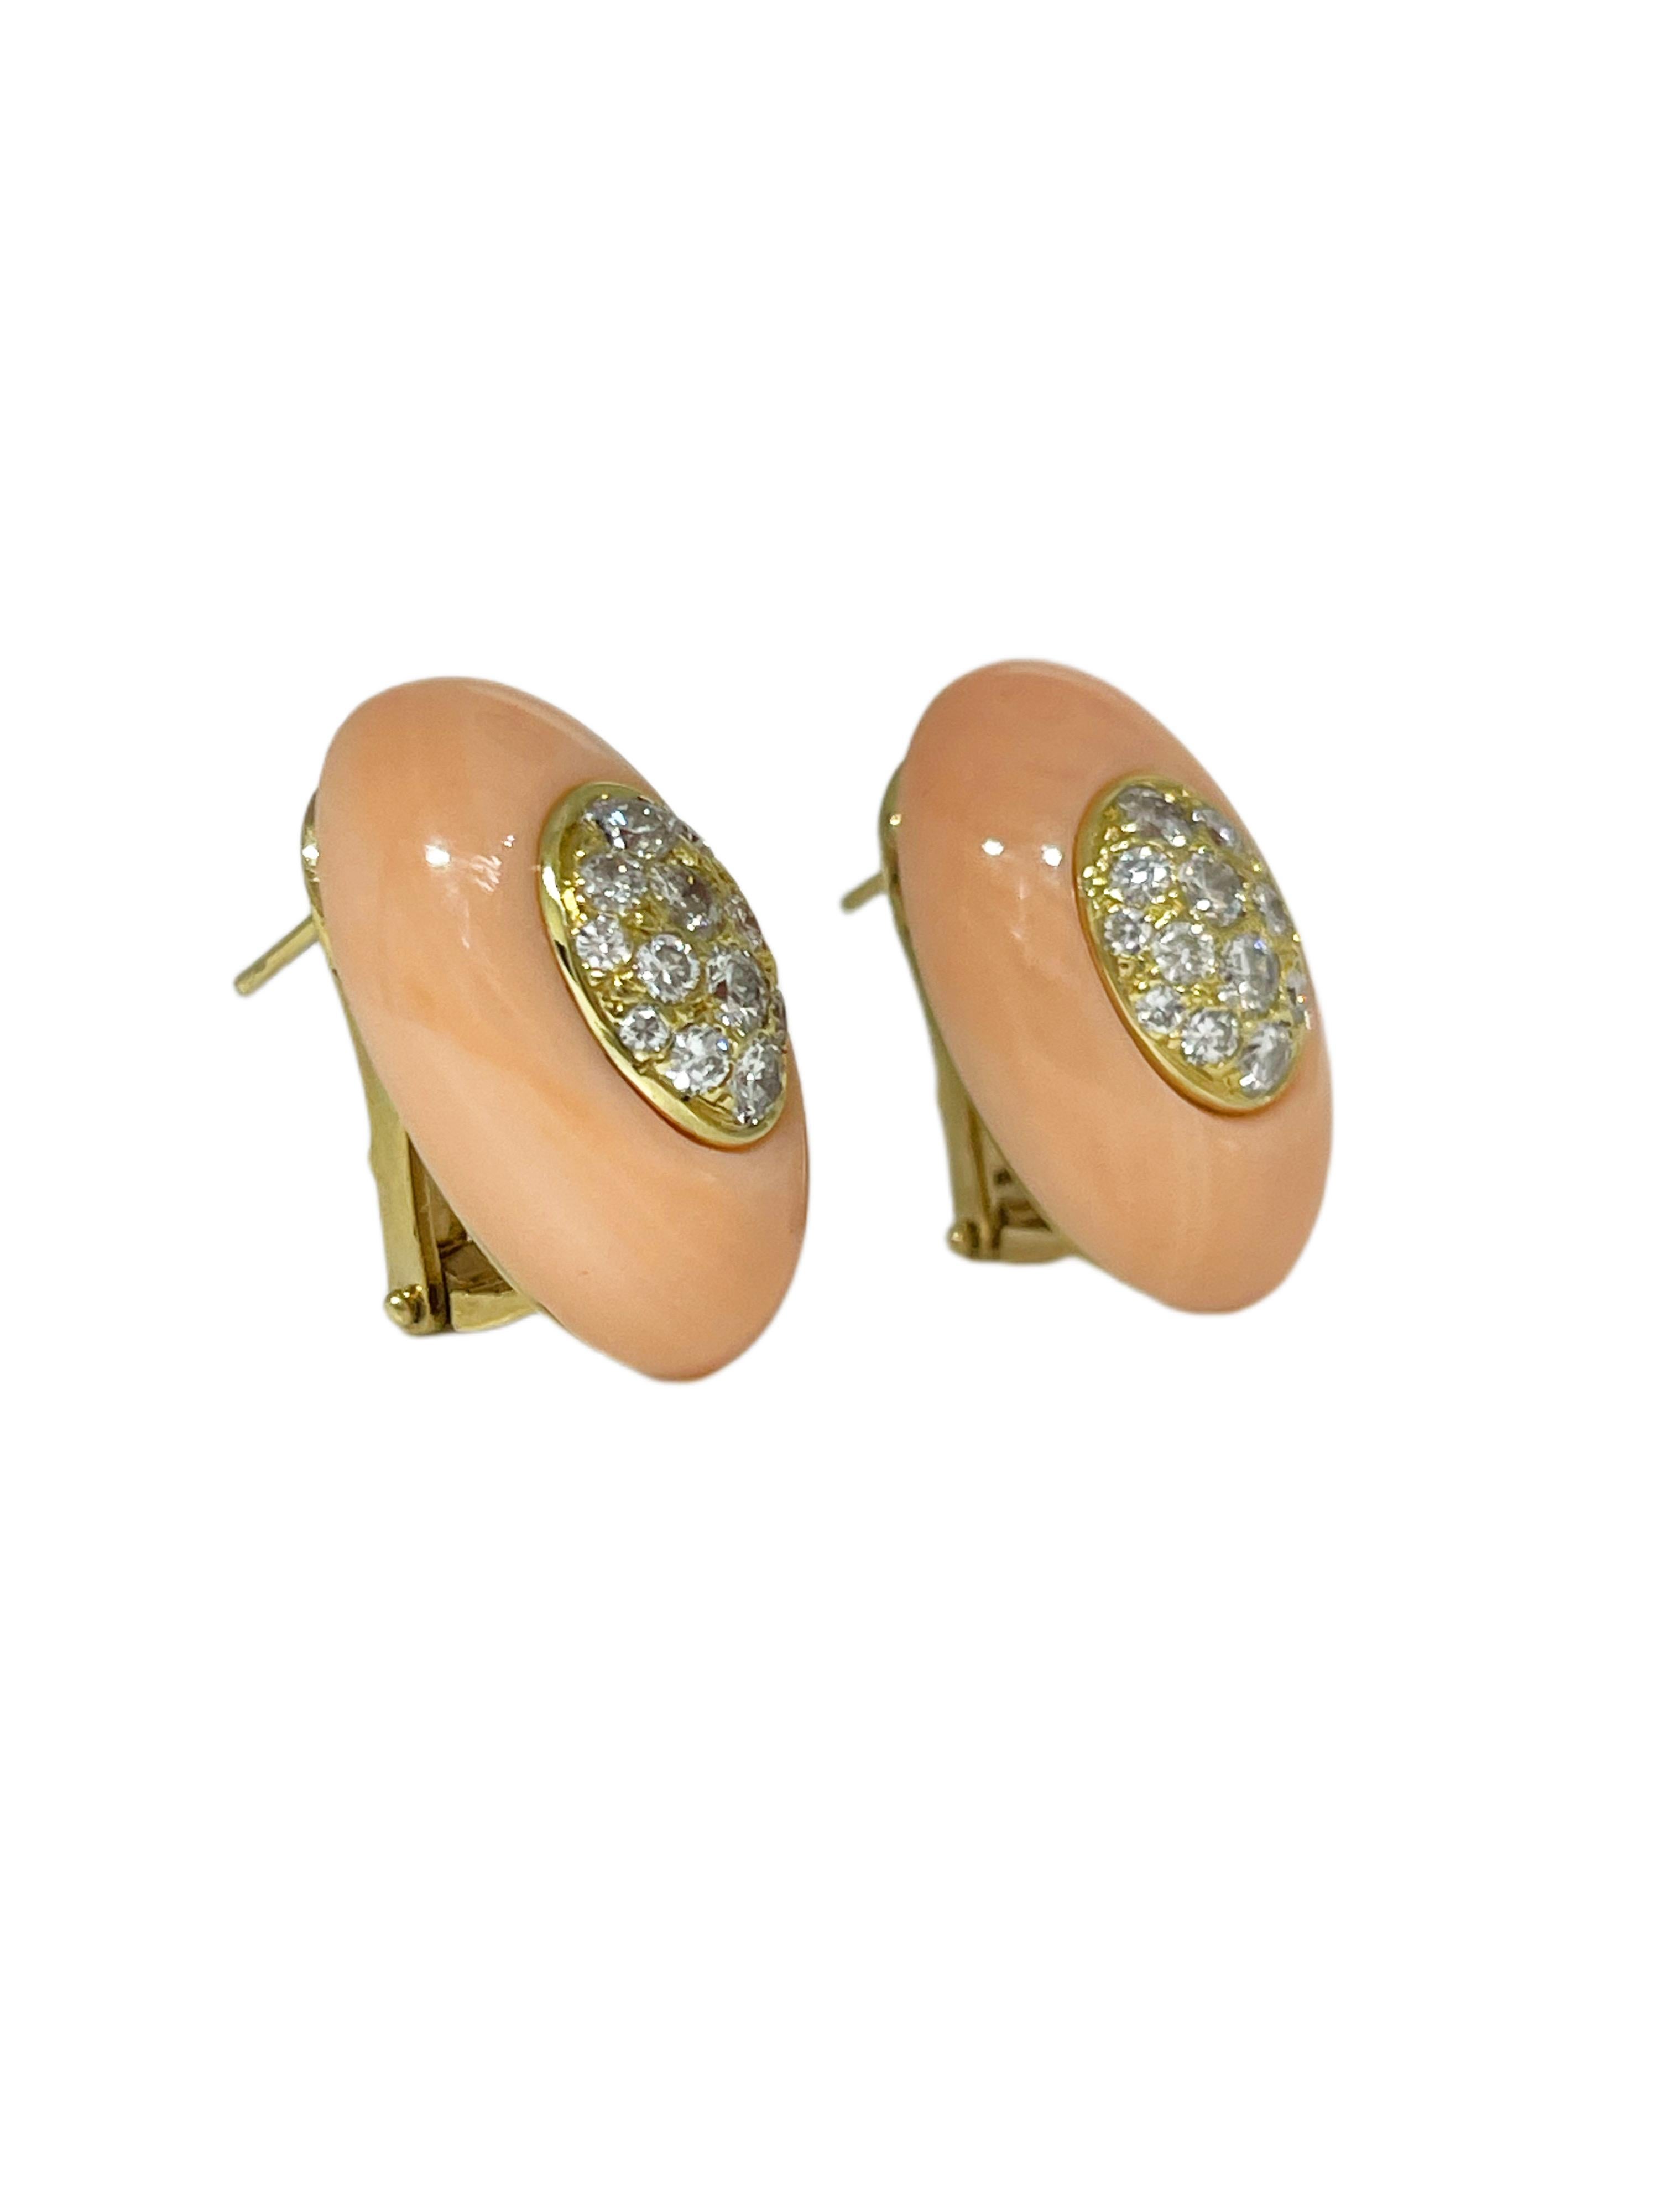 Brilliant Cut Rare Natural Coral & Diamond Earrings 14KT Rose Gold Undyed Coral Earrings For Sale